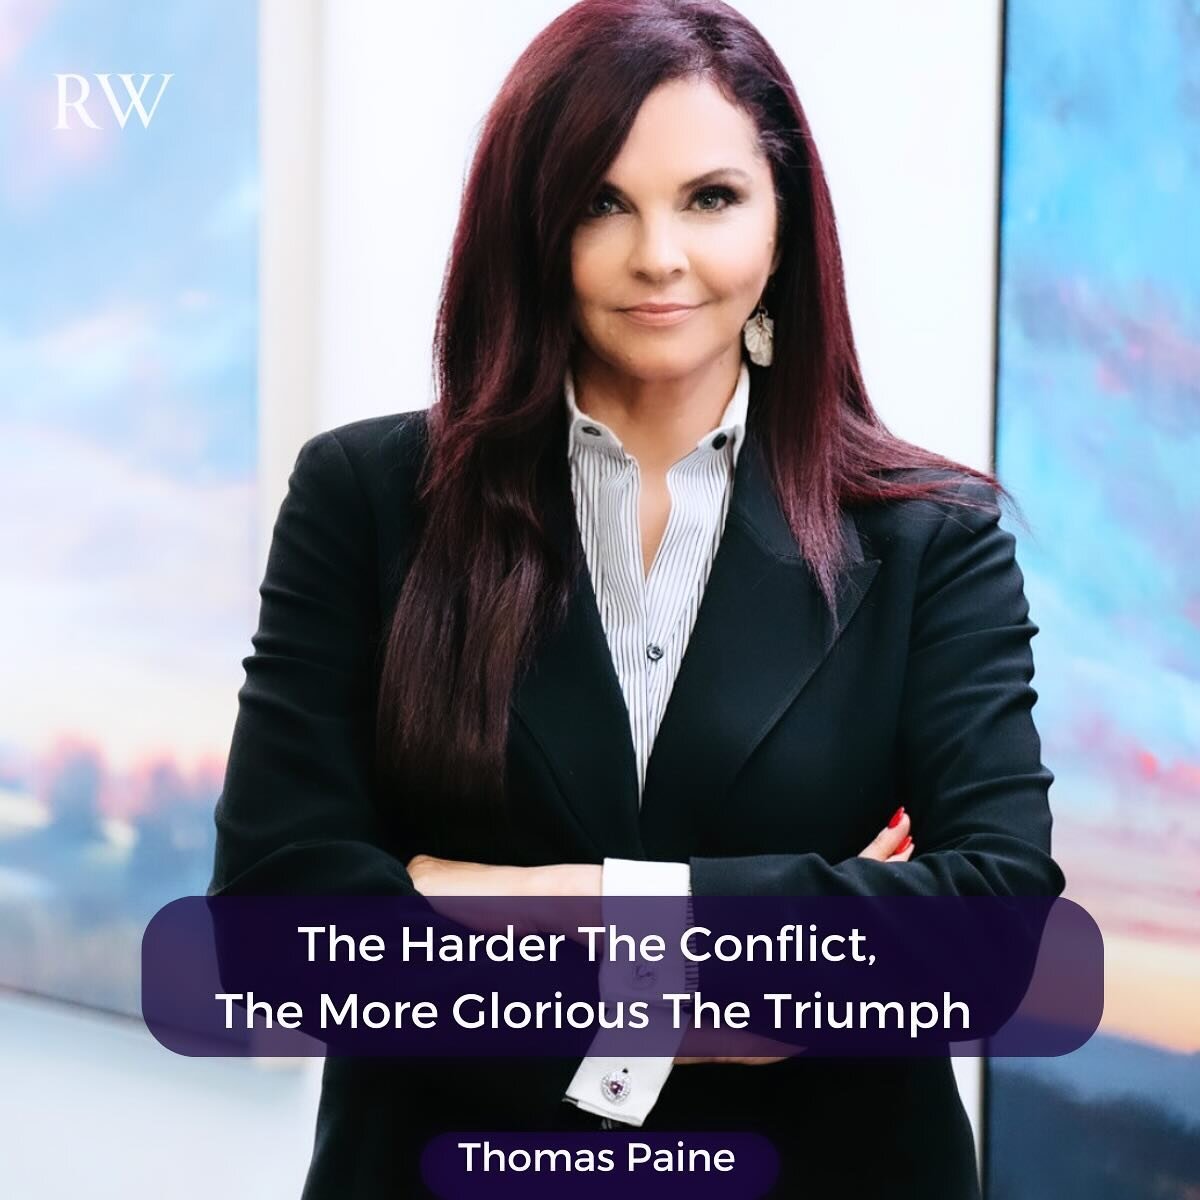 The harder the conflict, the more glorious the triumph.🌟

As sales professionals, we are faced with tumultuous times in the ever-changing workplace. 

When everything seems to crumble, I find it super helpful to remember that the sweetest victories 